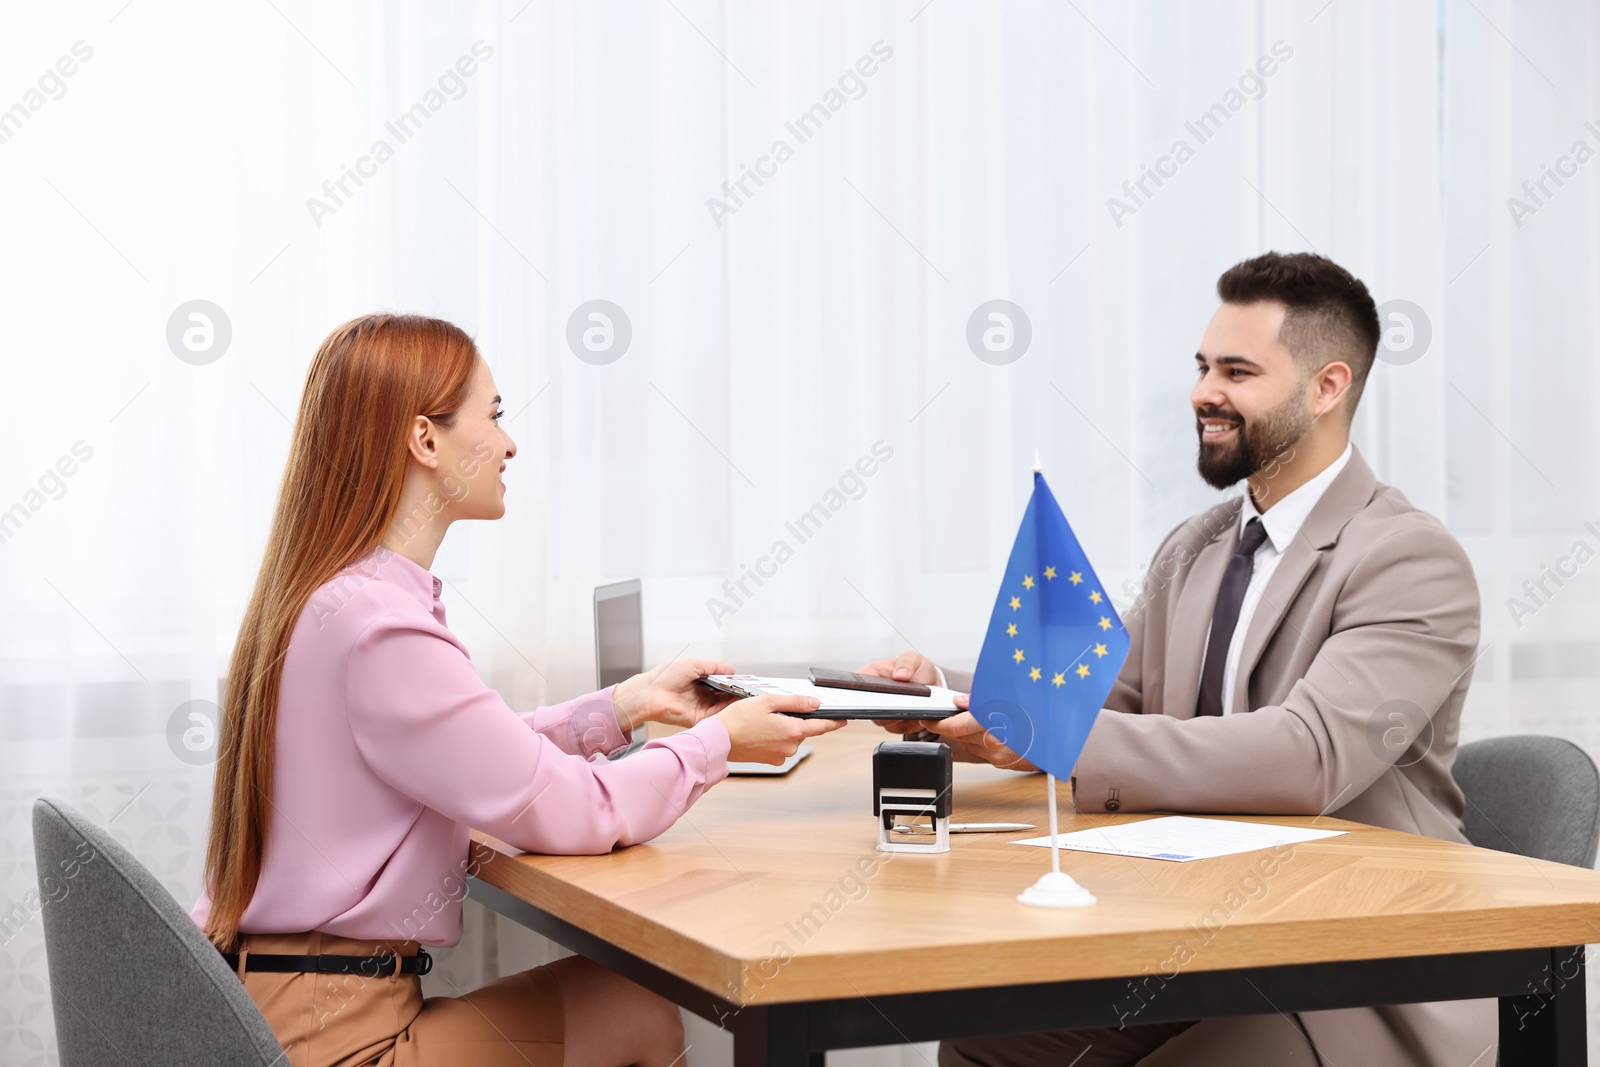 Photo of Immigration to European Union. Woman giving visa application form to embassy worker in office